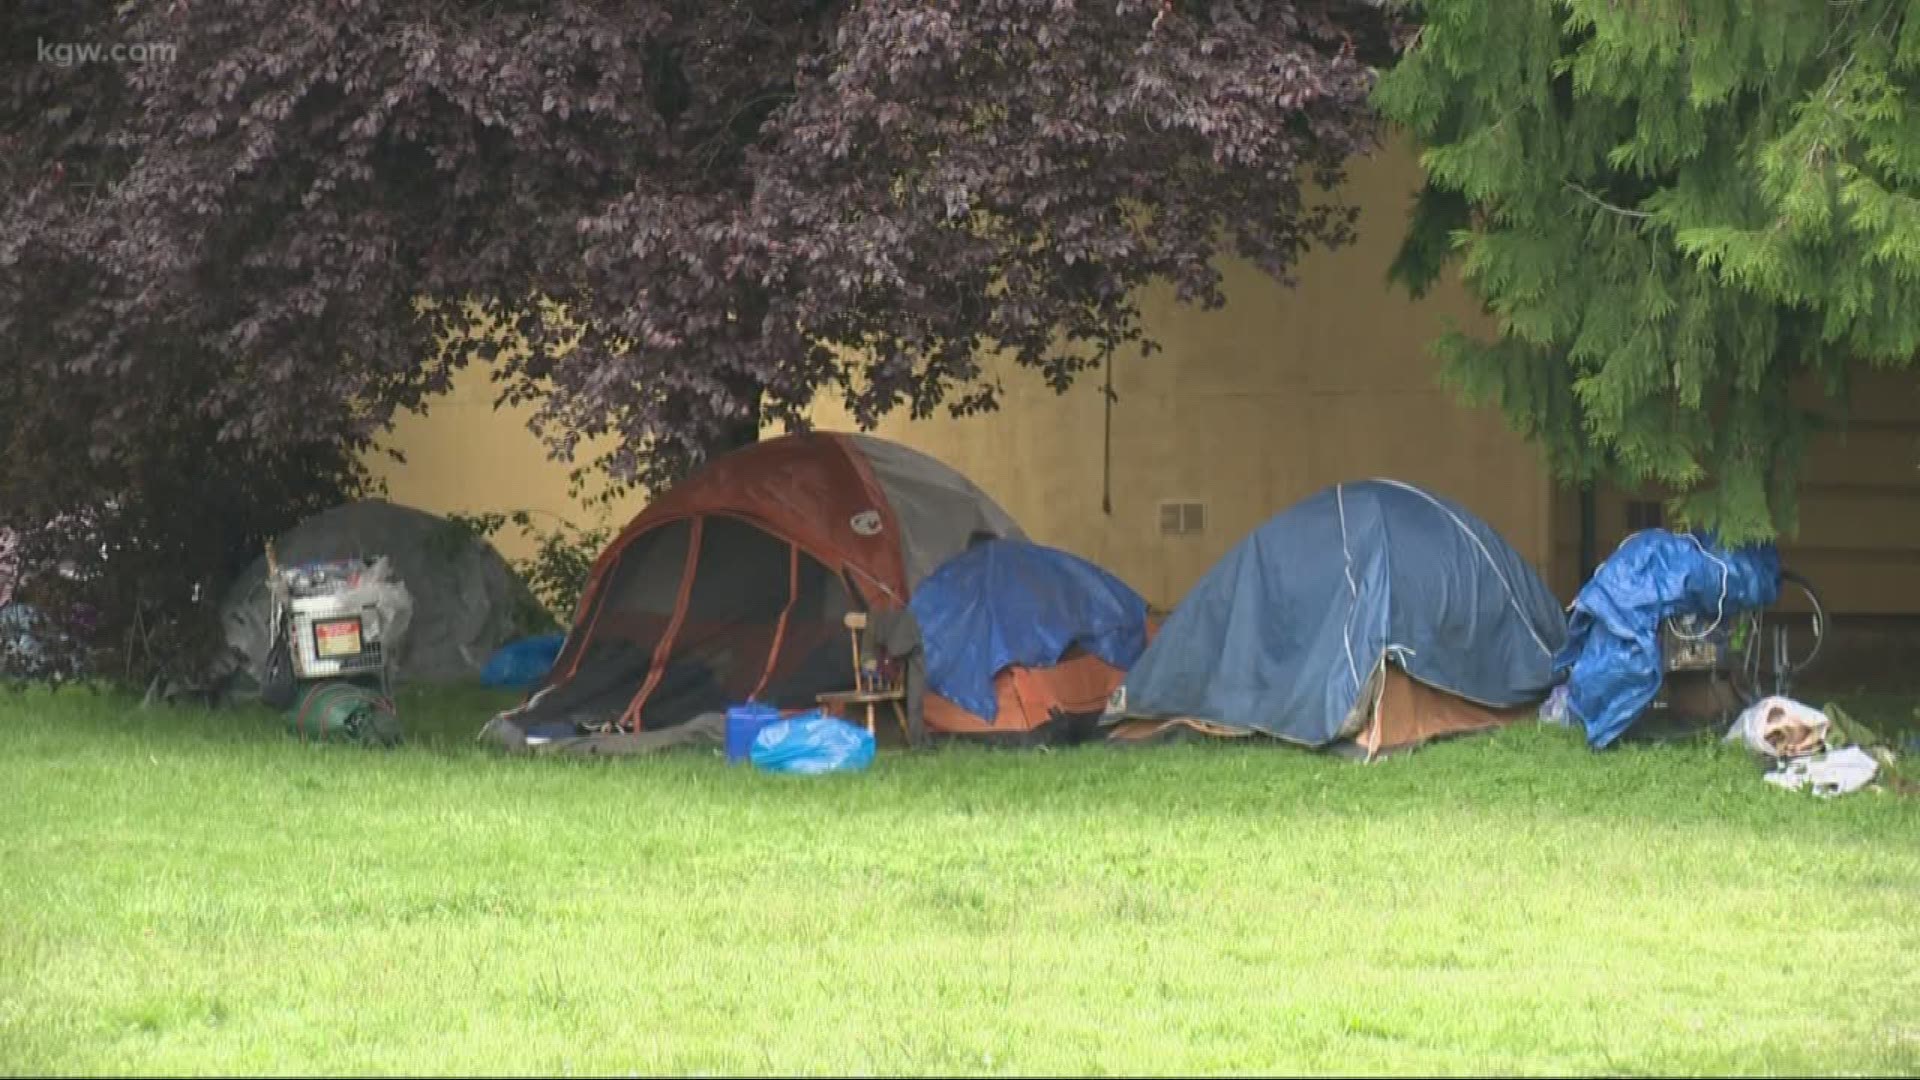 Illegal campers took over a church property in St. Johns.